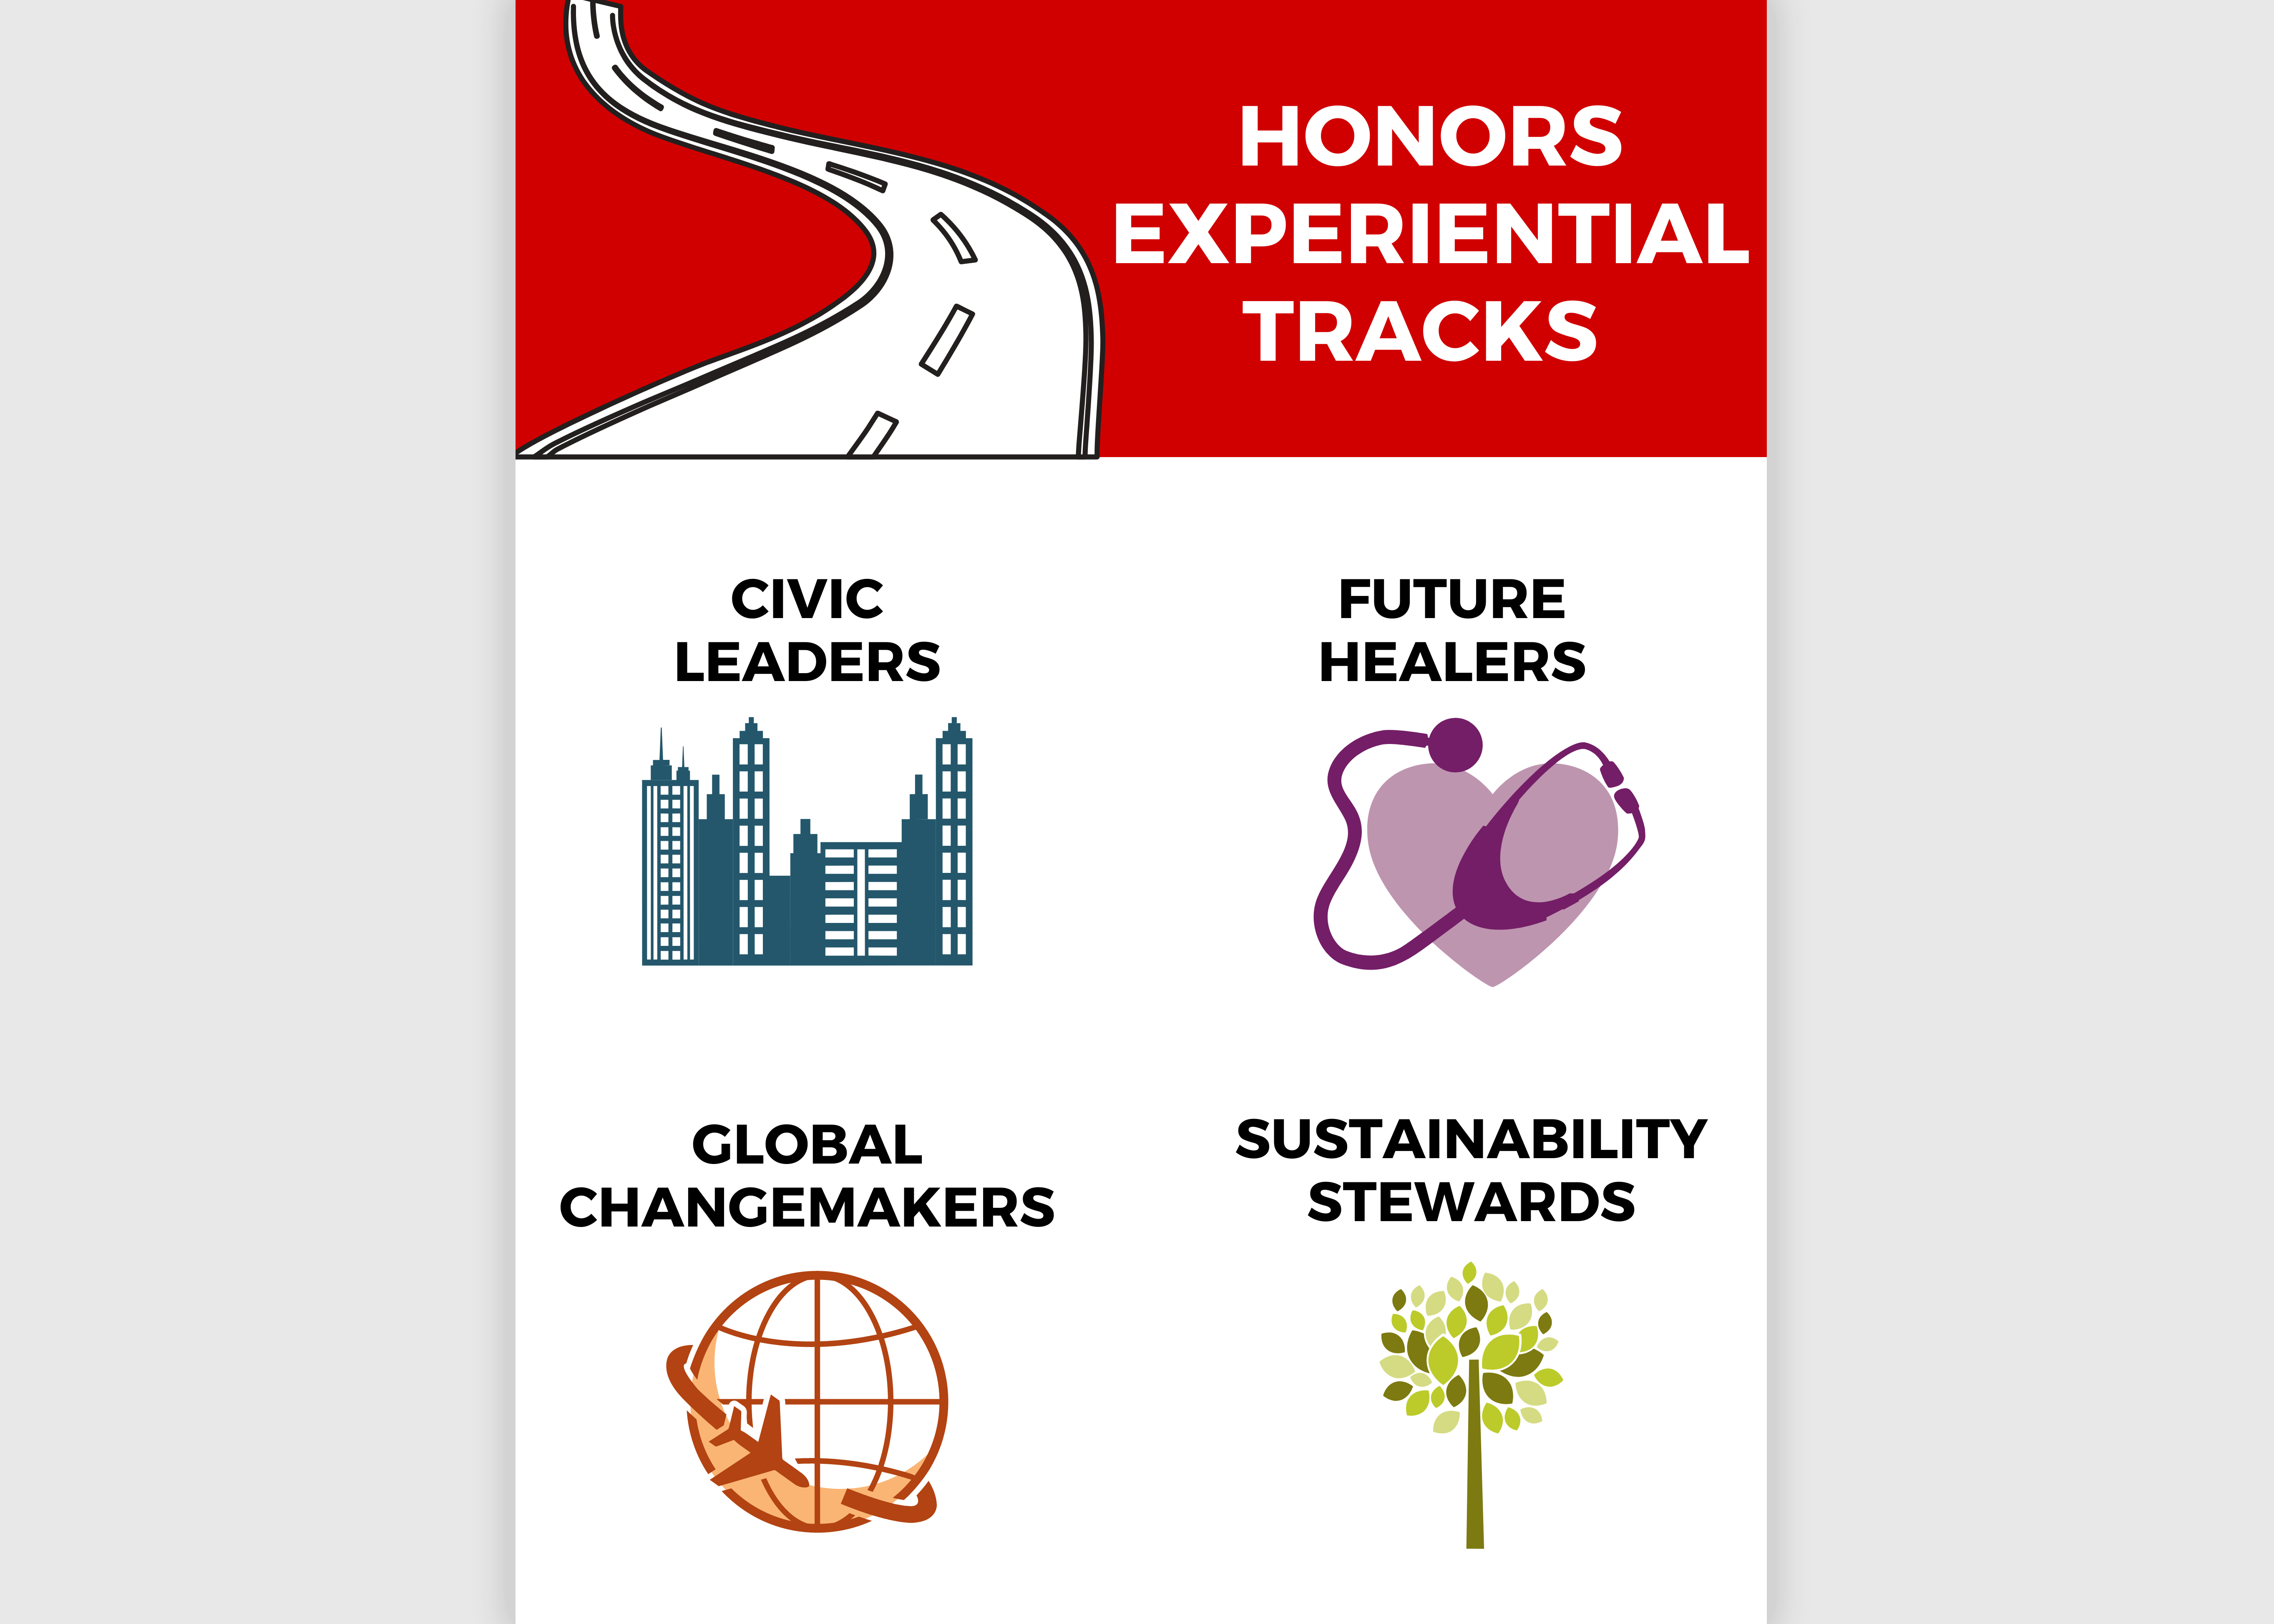 Students may choose from four tracks related to their interests.